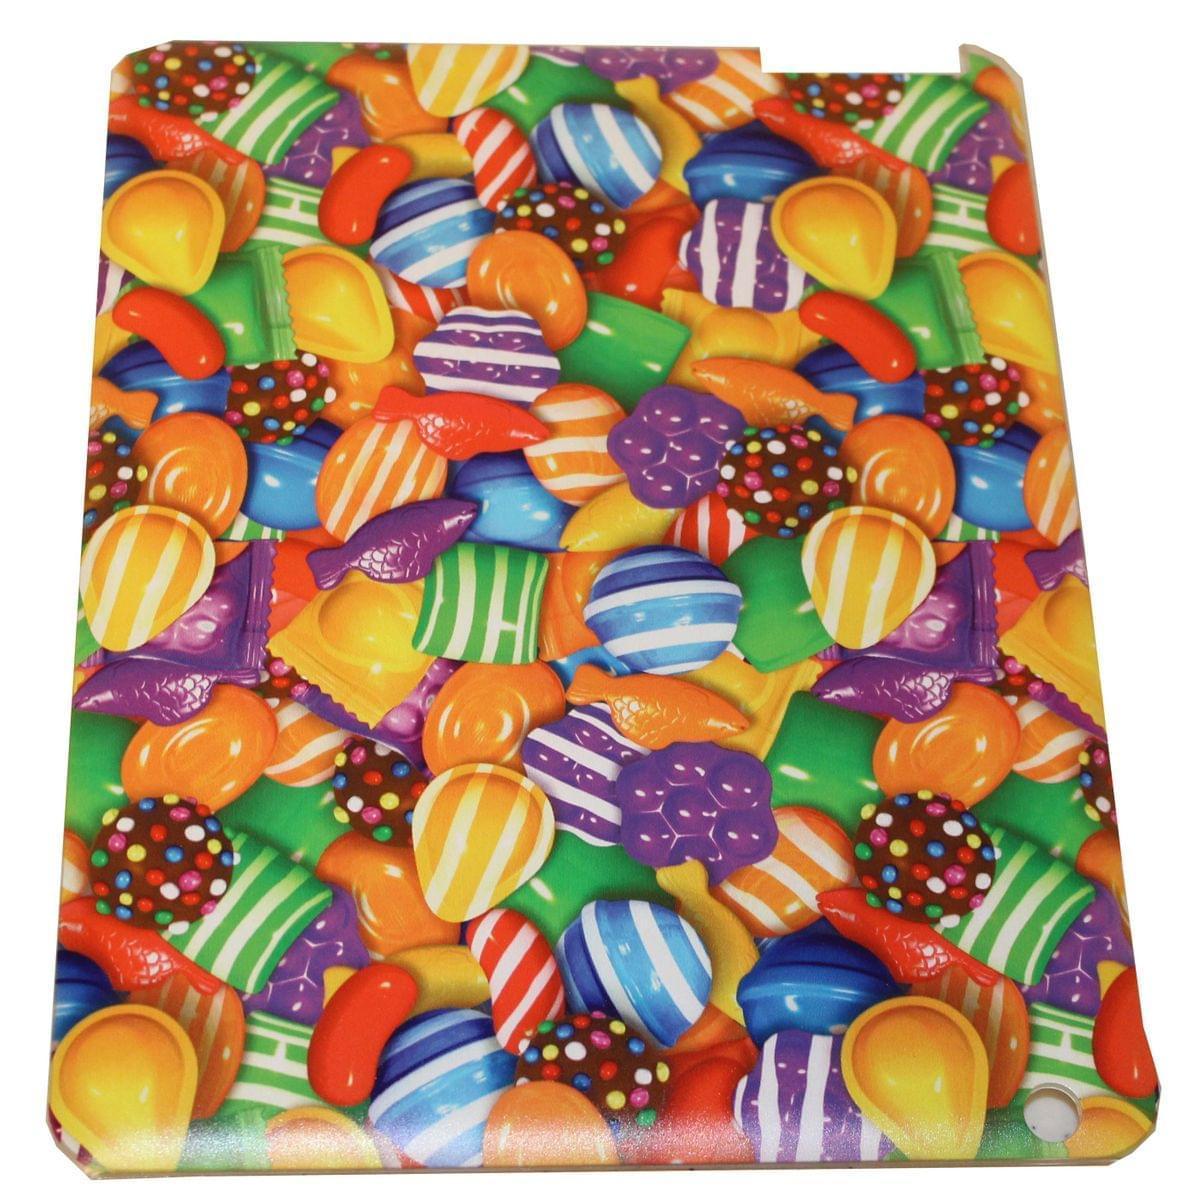 Candy Crush App Logo - Candy Crush iPad Hard Case Multi Color With Fish